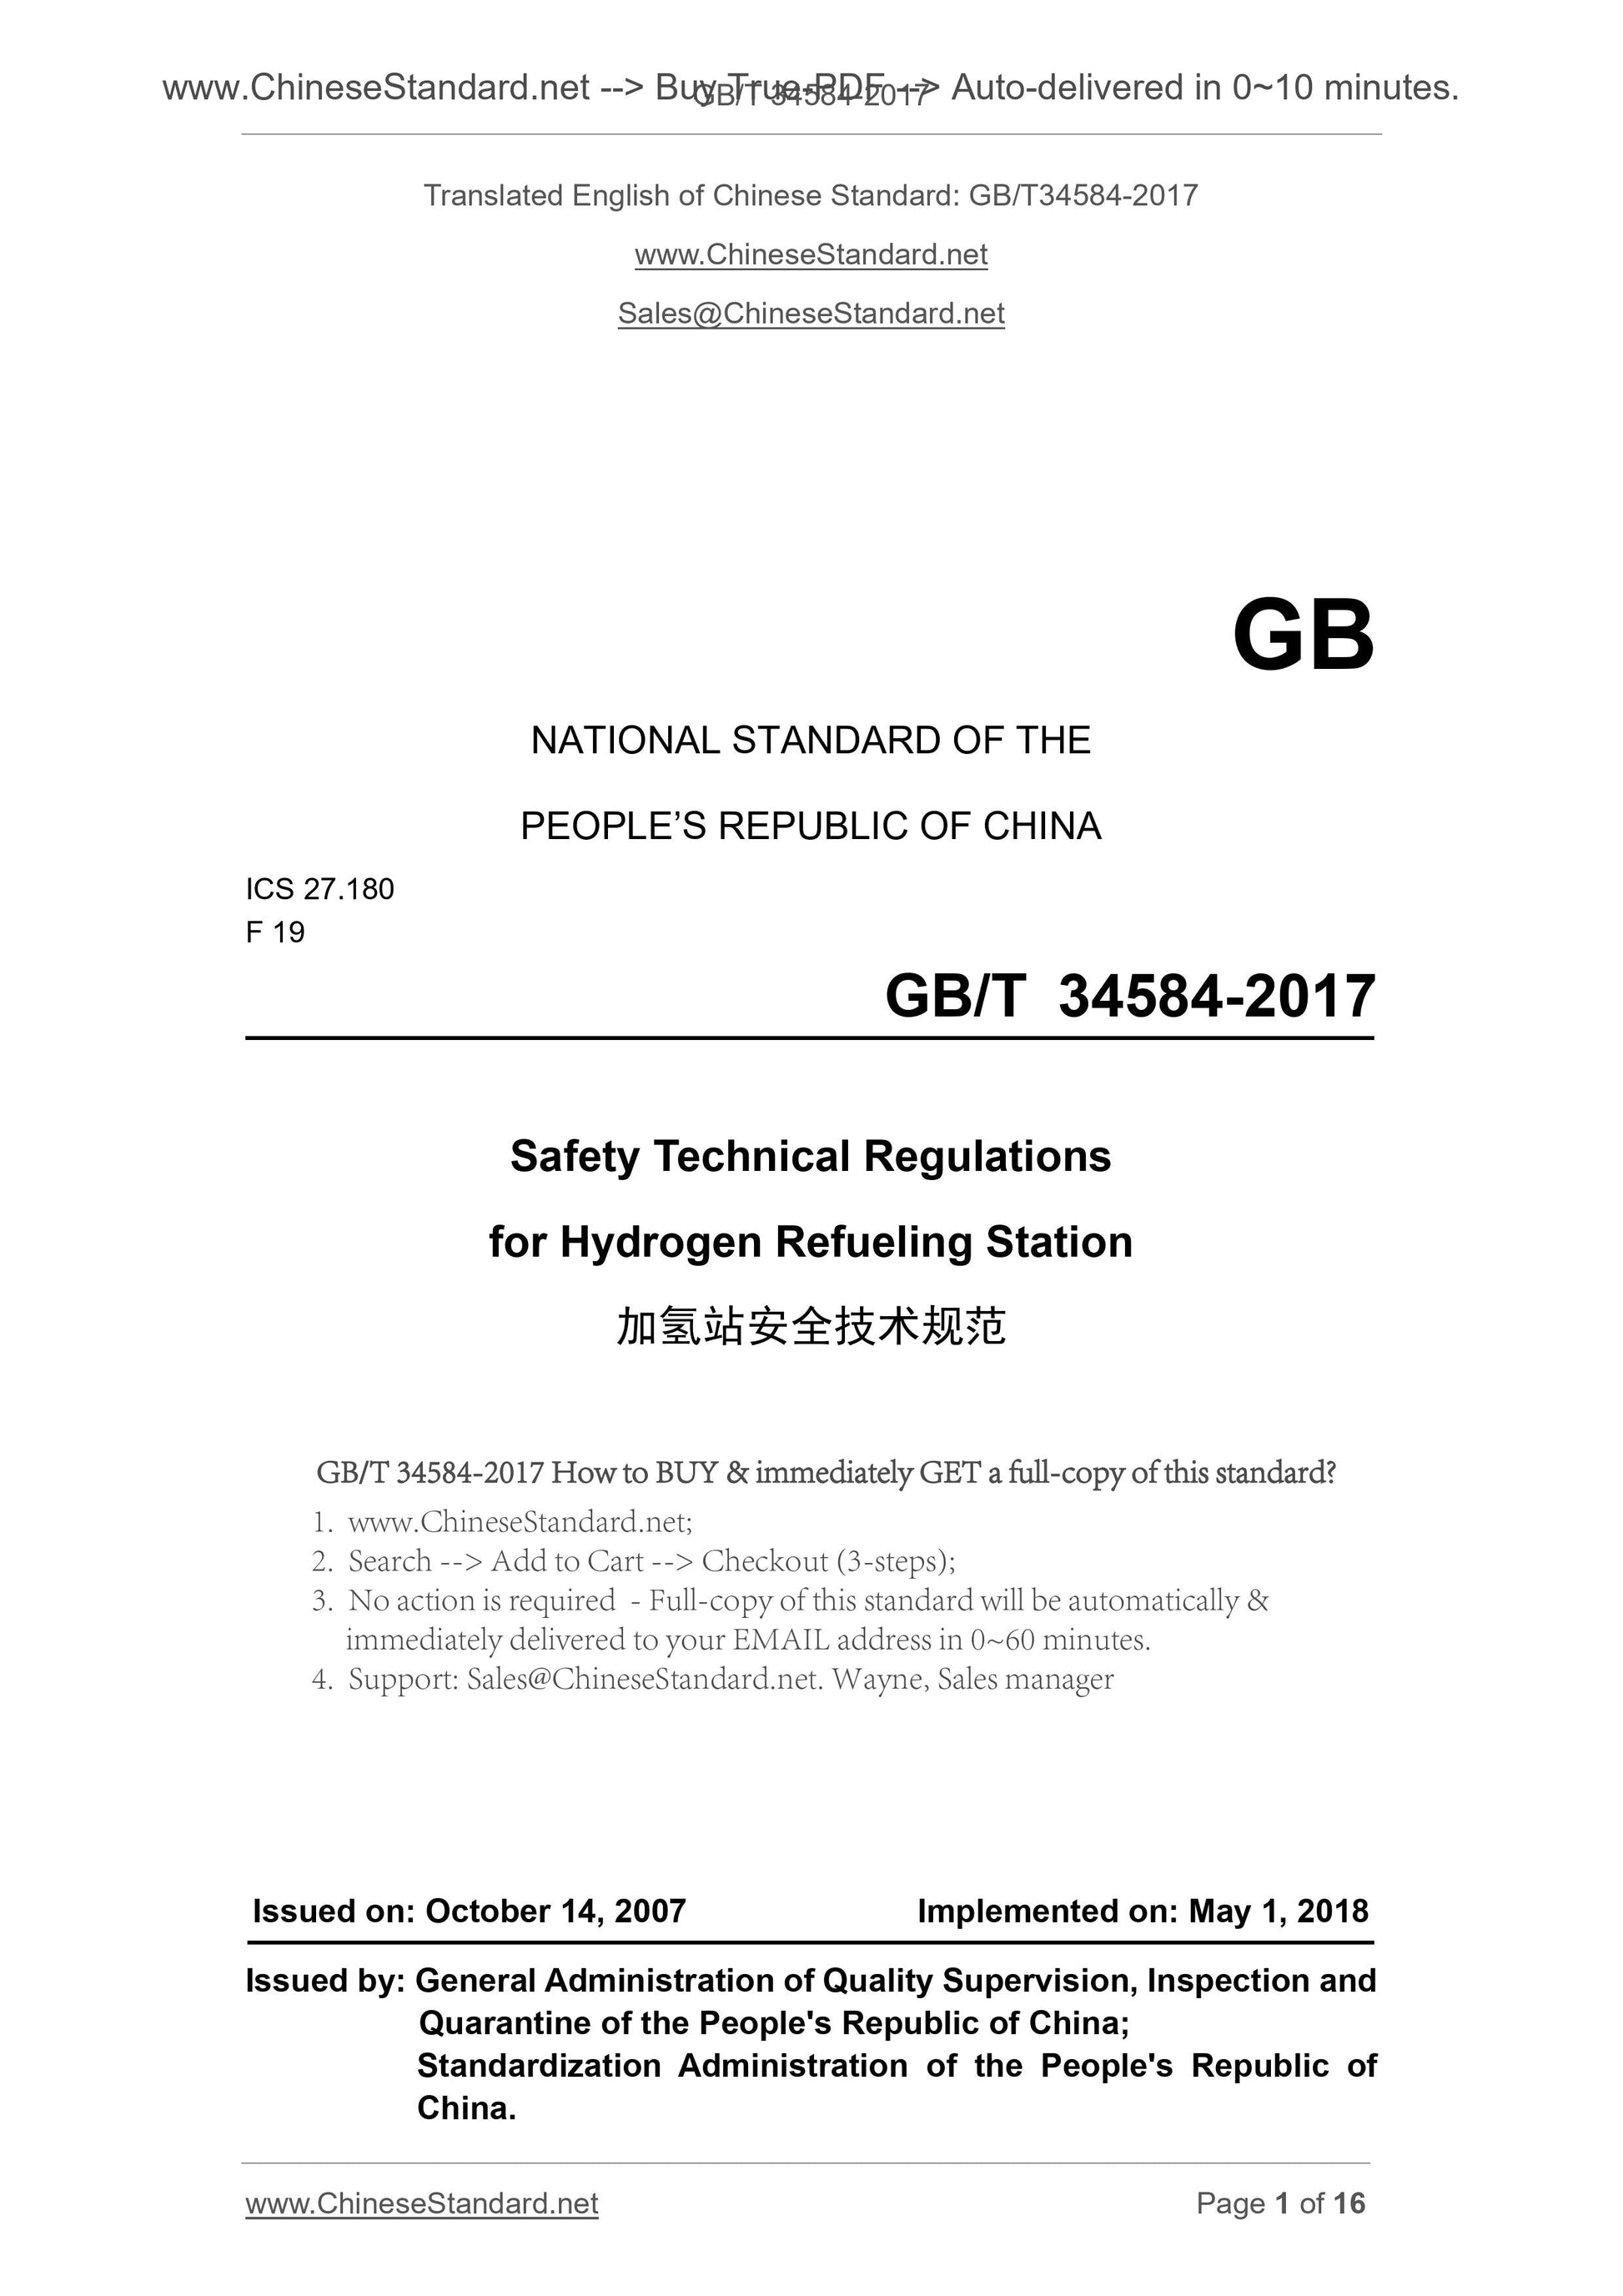 GB/T 34584-2017 Page 1